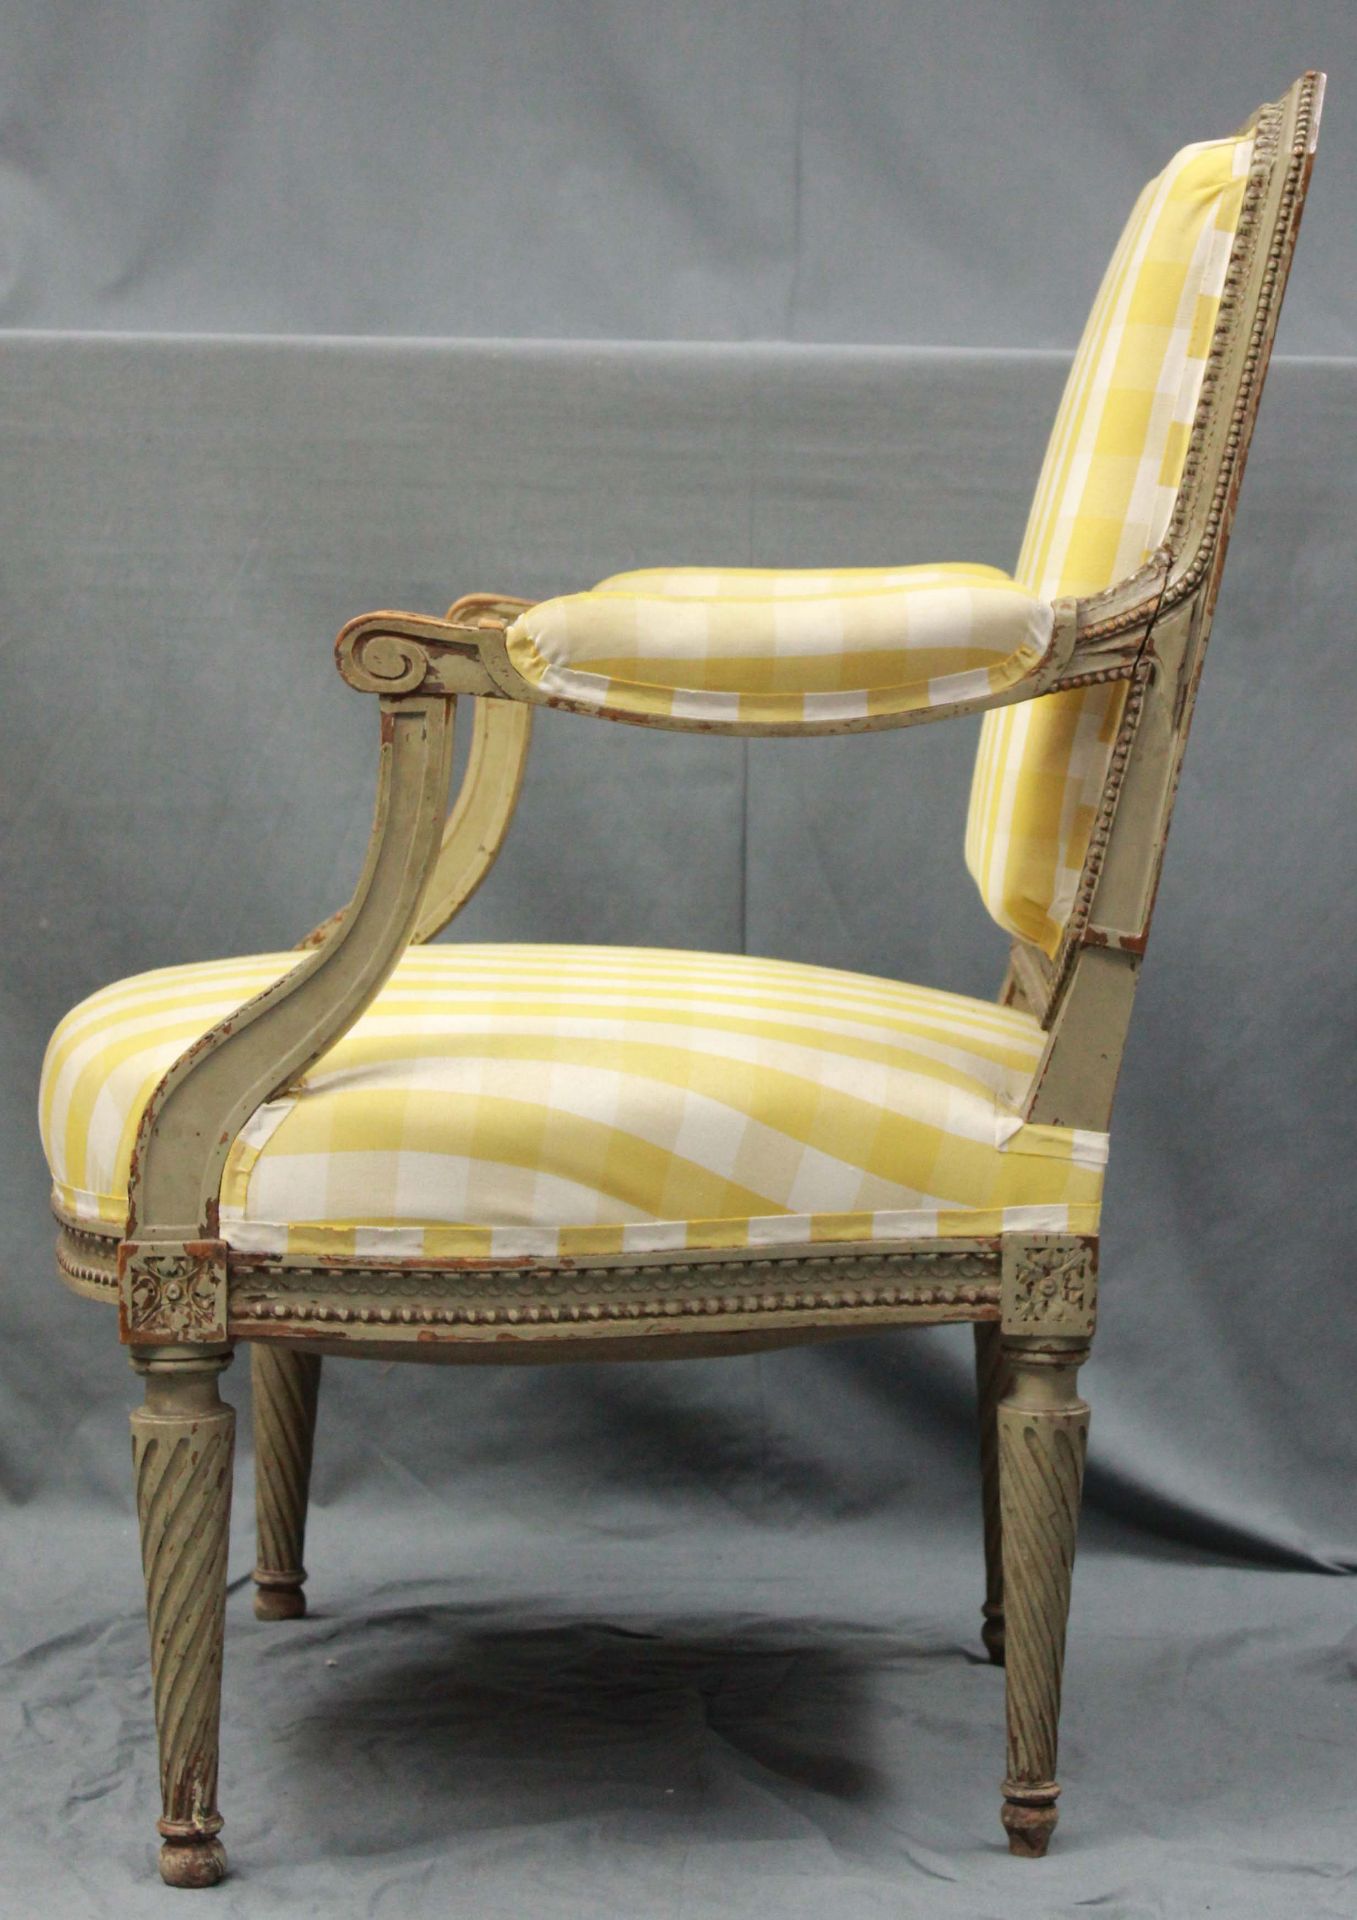 Louis XVI armchair. Bergere. Probably from around 1780. - Image 11 of 18